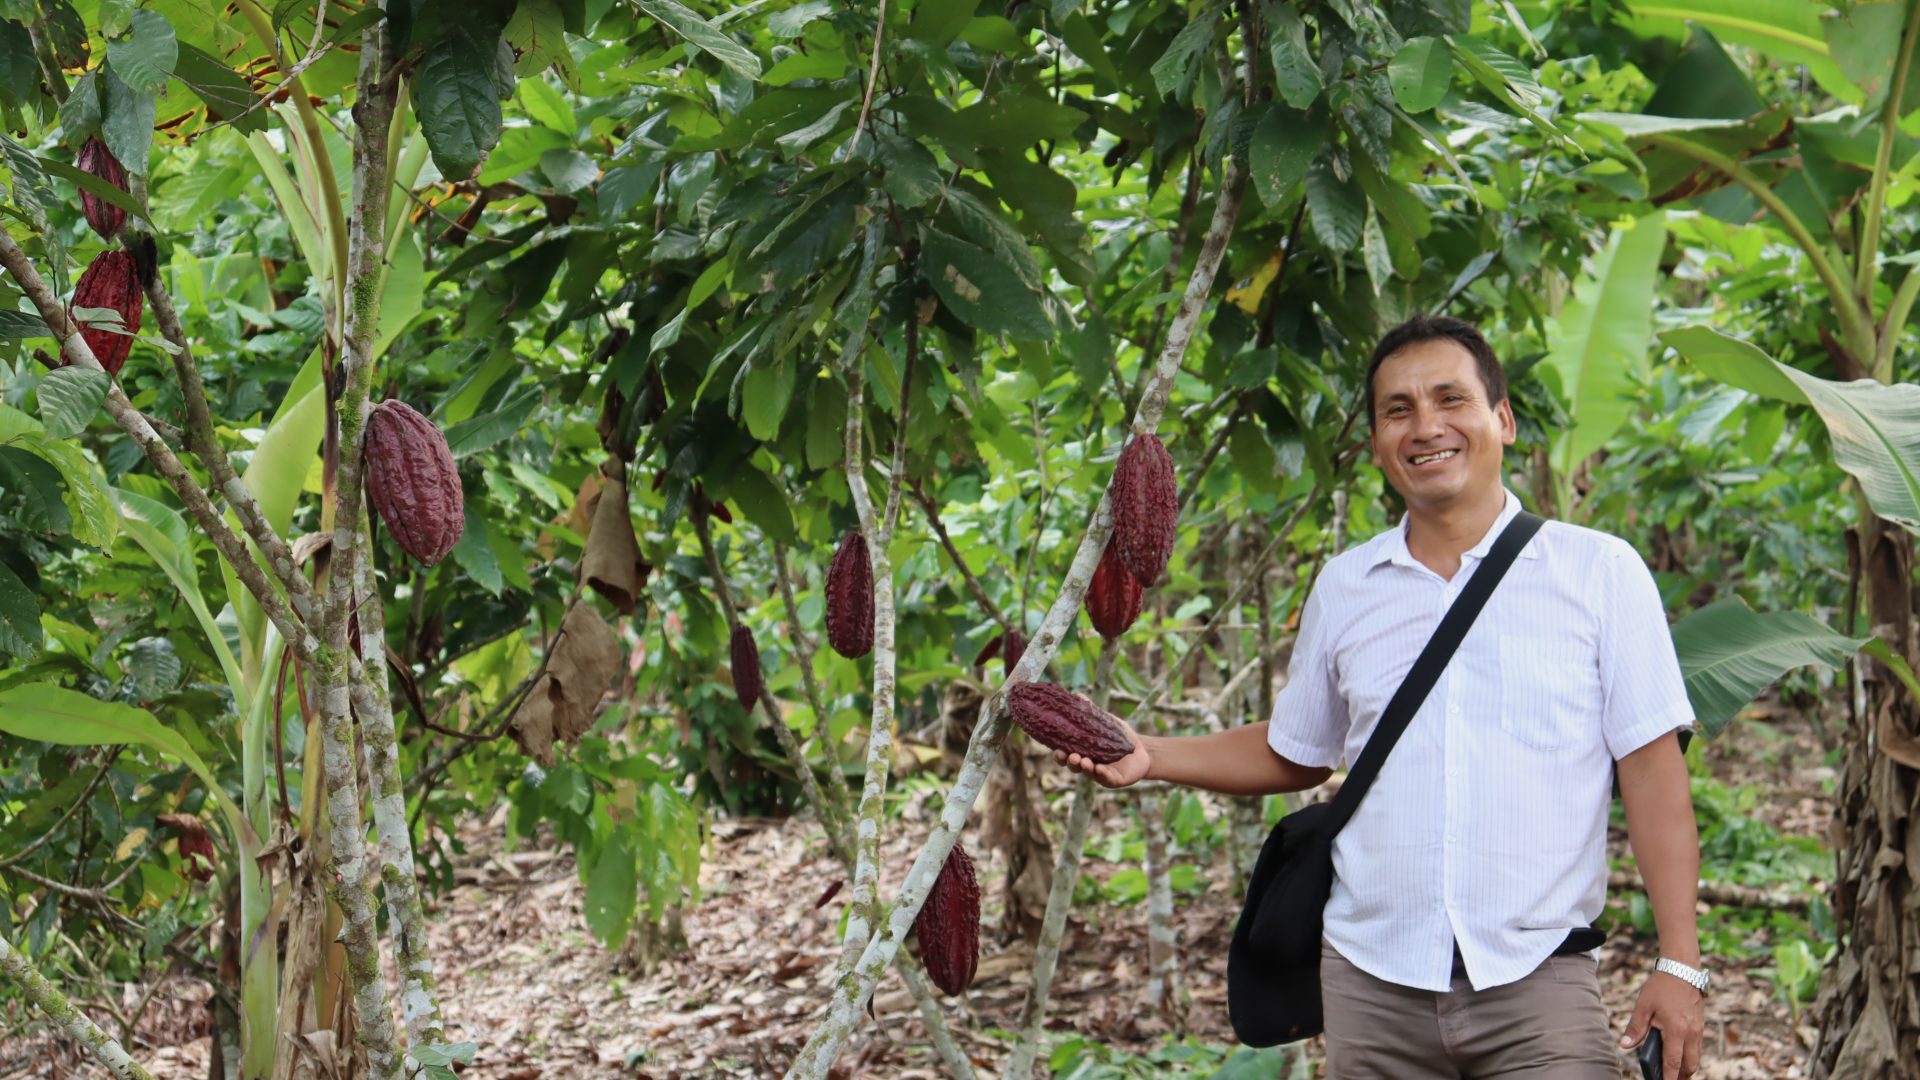 Moisés, Cacao field assistant, checking pods in a cacao garden in the Peruvian Amazon.